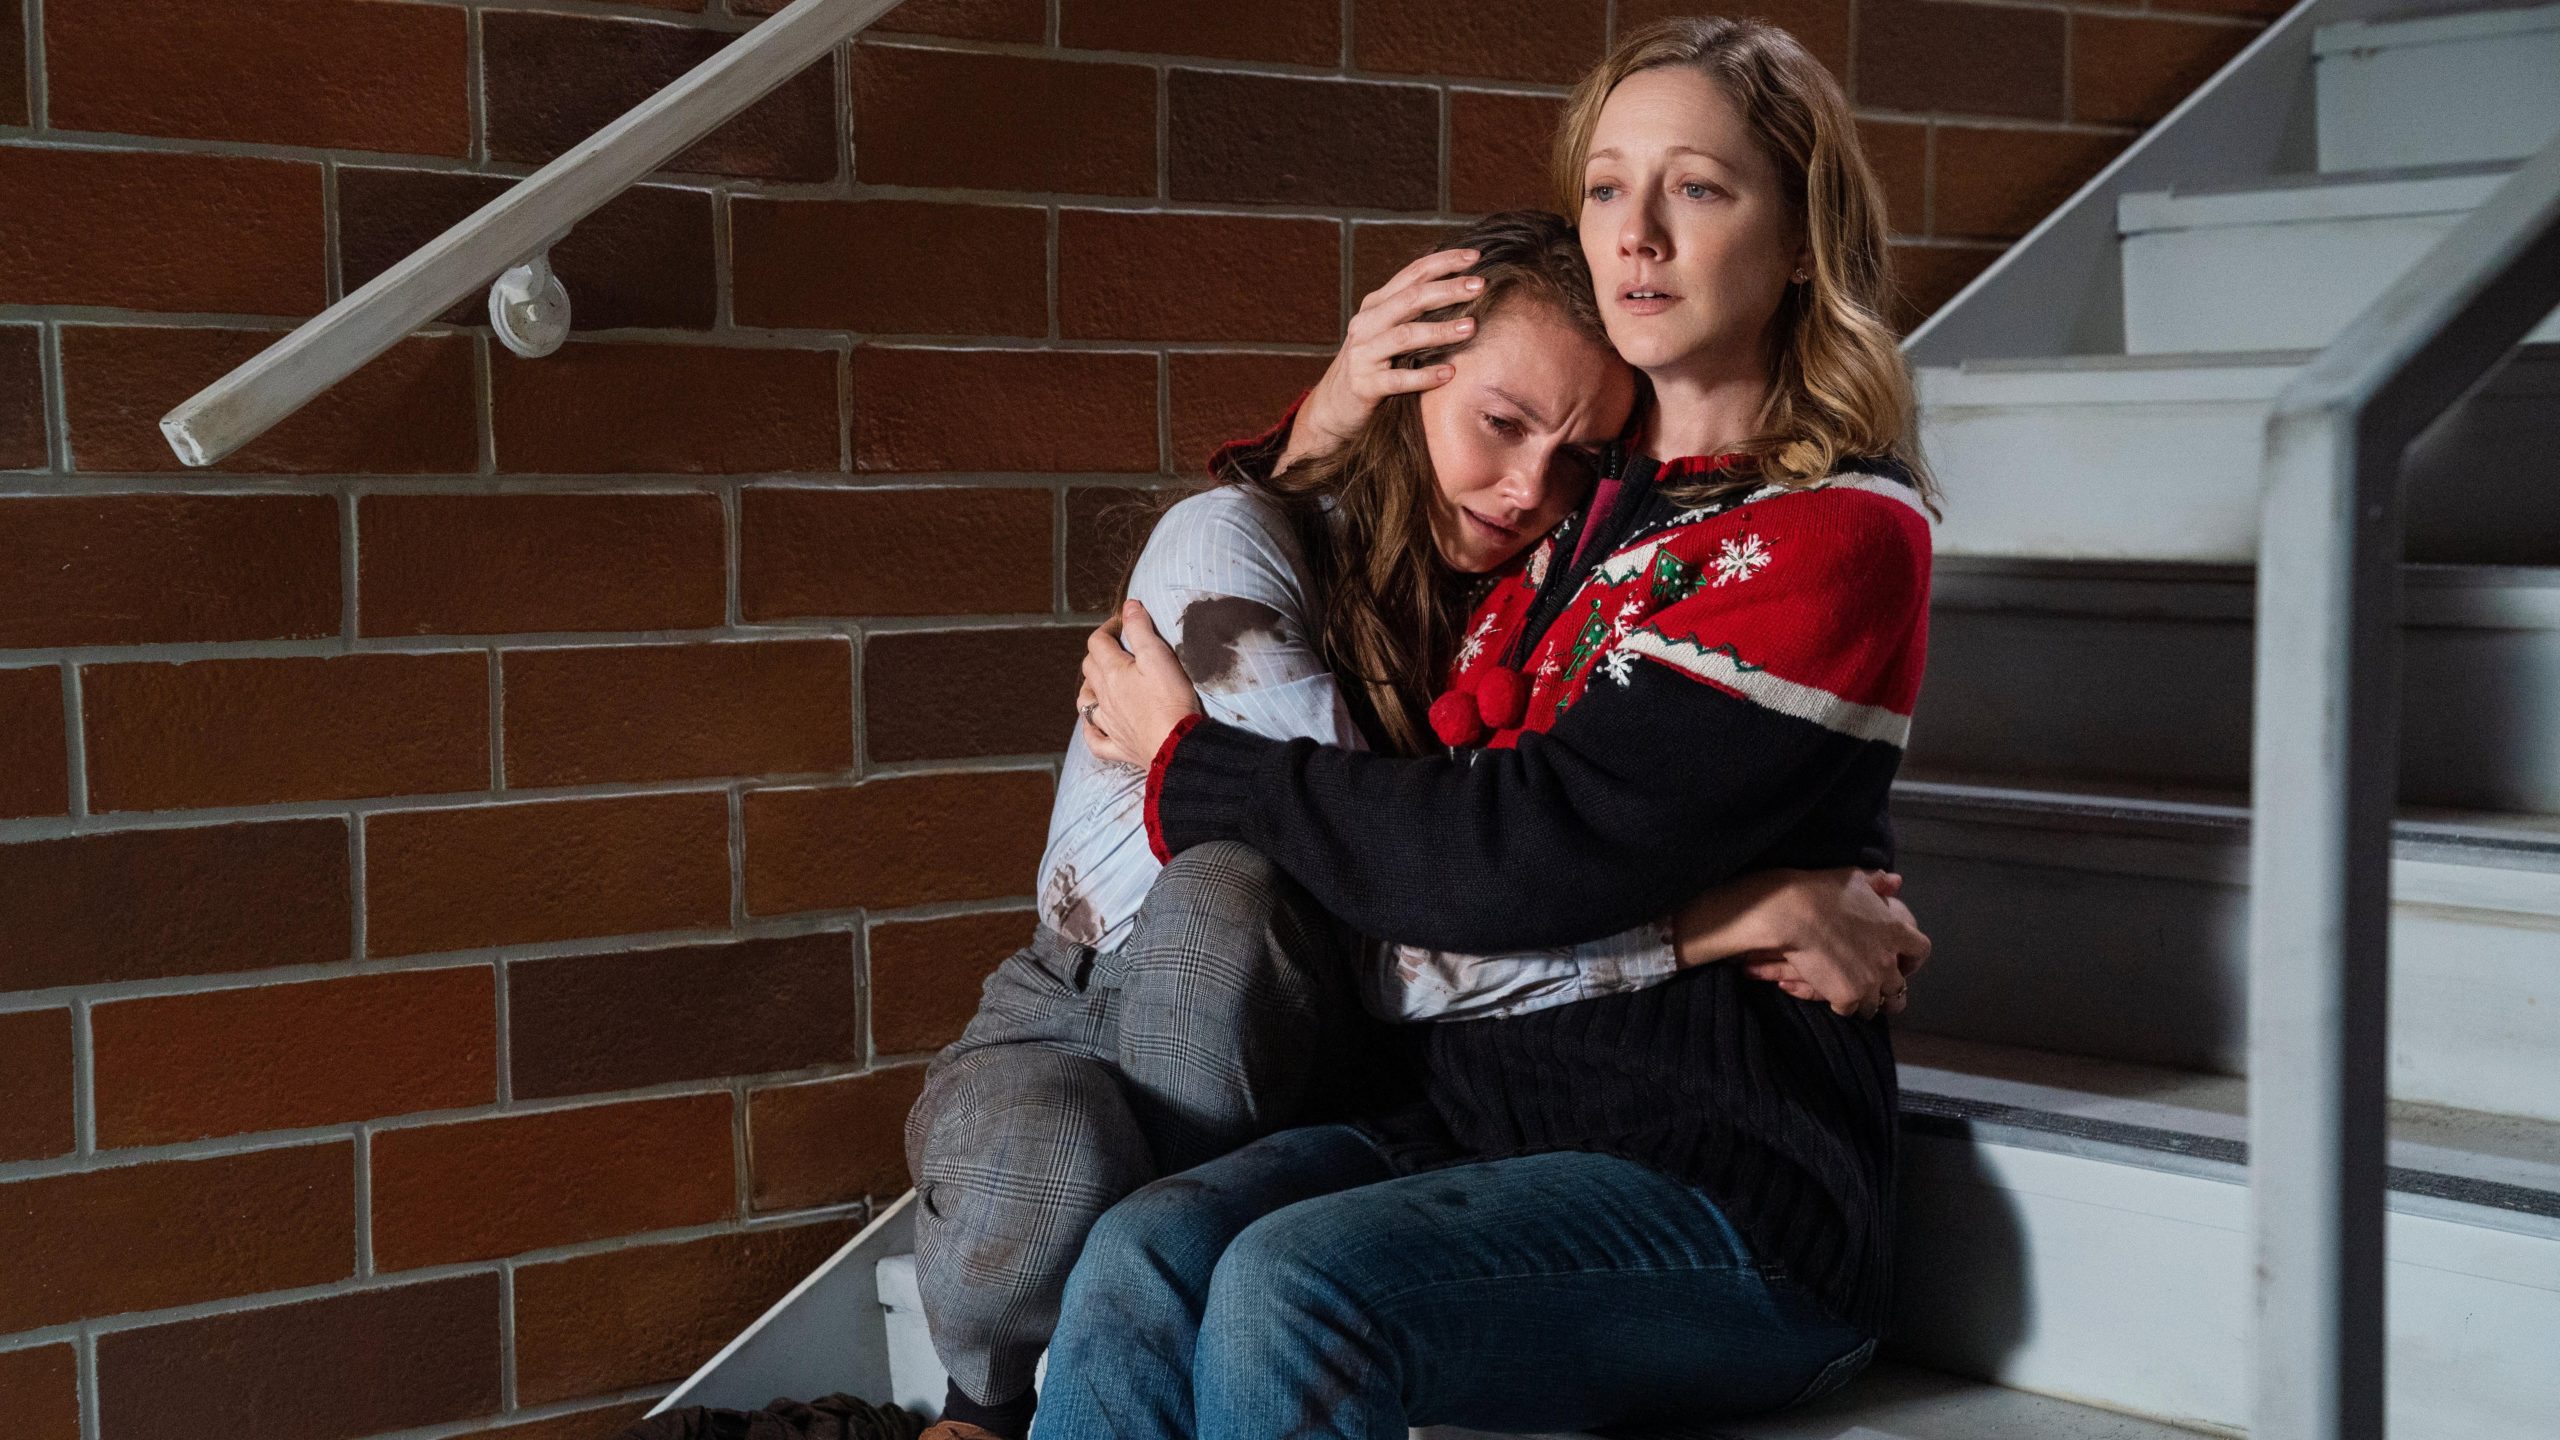 Allyson and her mum (Judy Greer) making the face I made during the last 20 minutes of Halloween Kills. (Image: Universal Pictures)